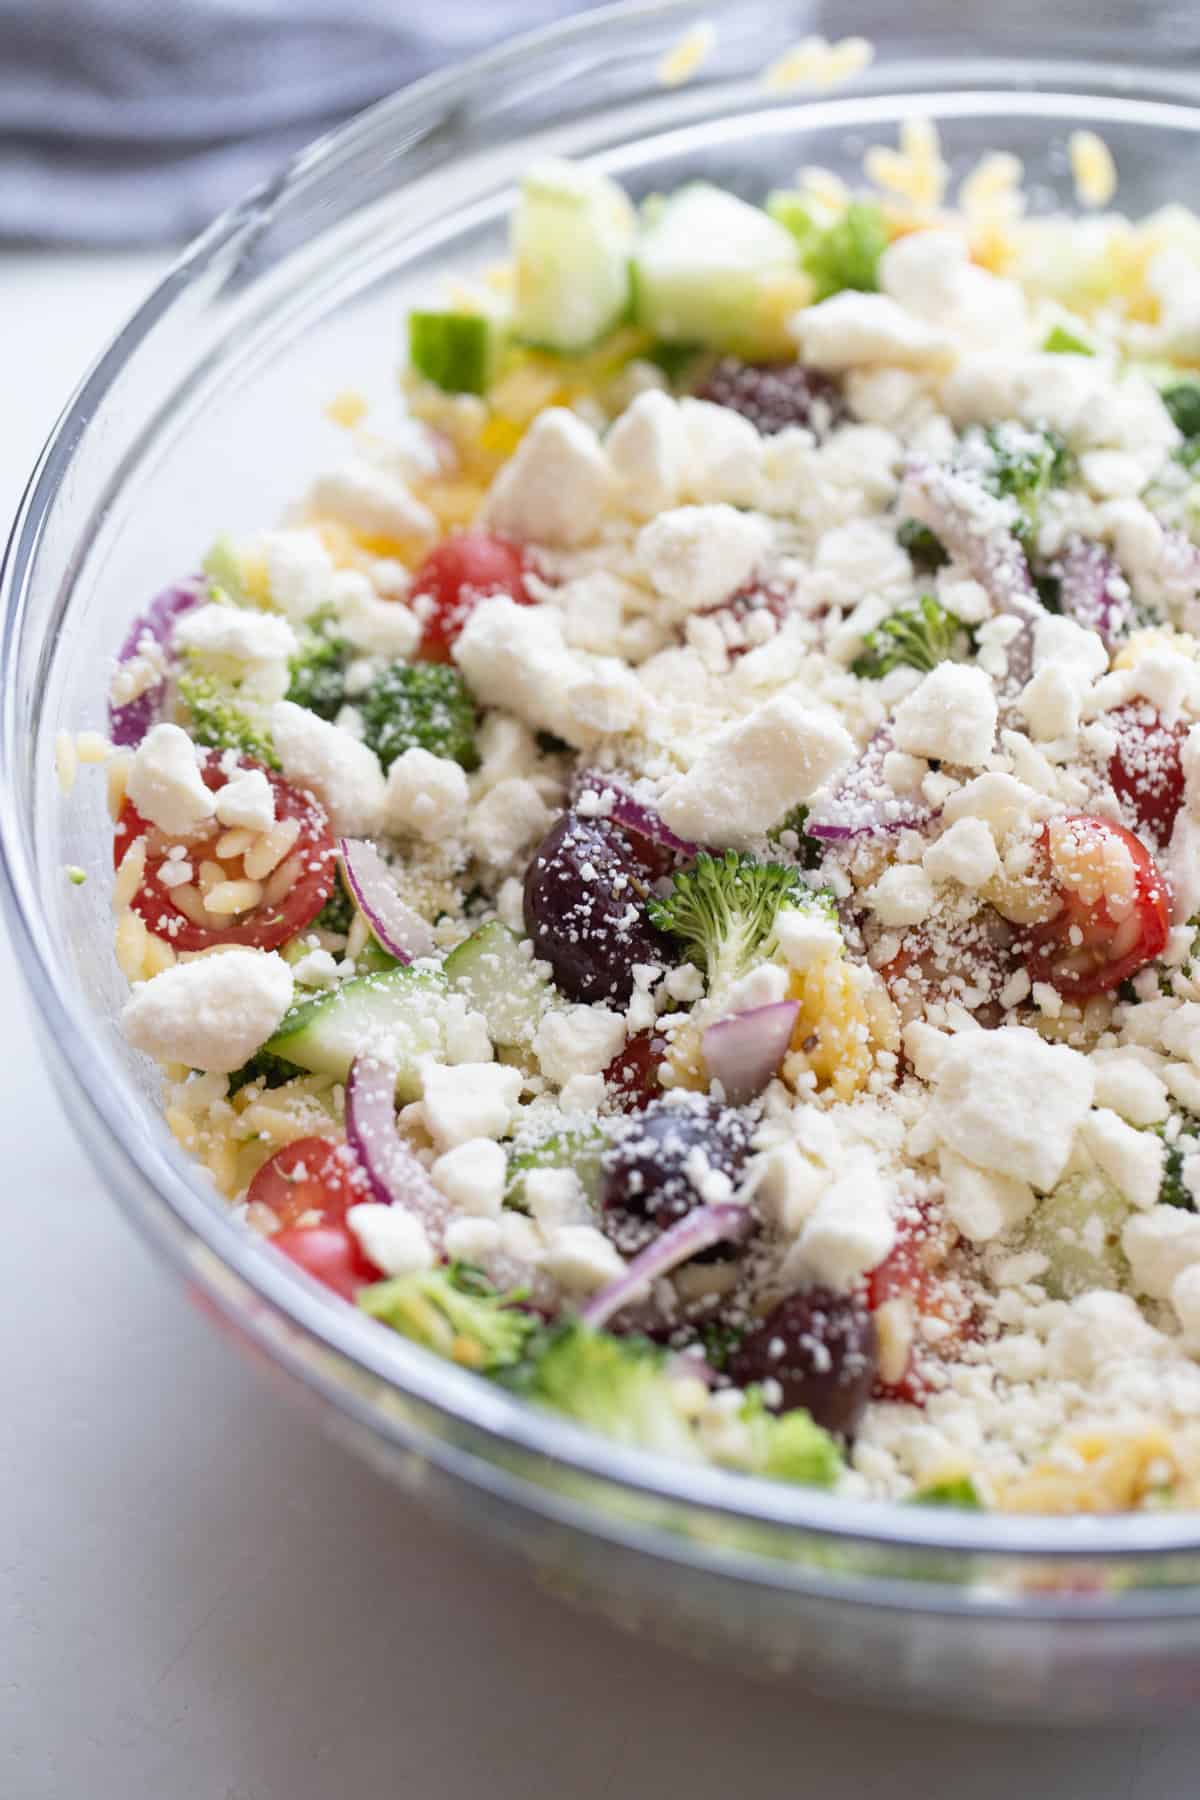 Gluten free orzo salad in a glass bowl, topped with feta cheese